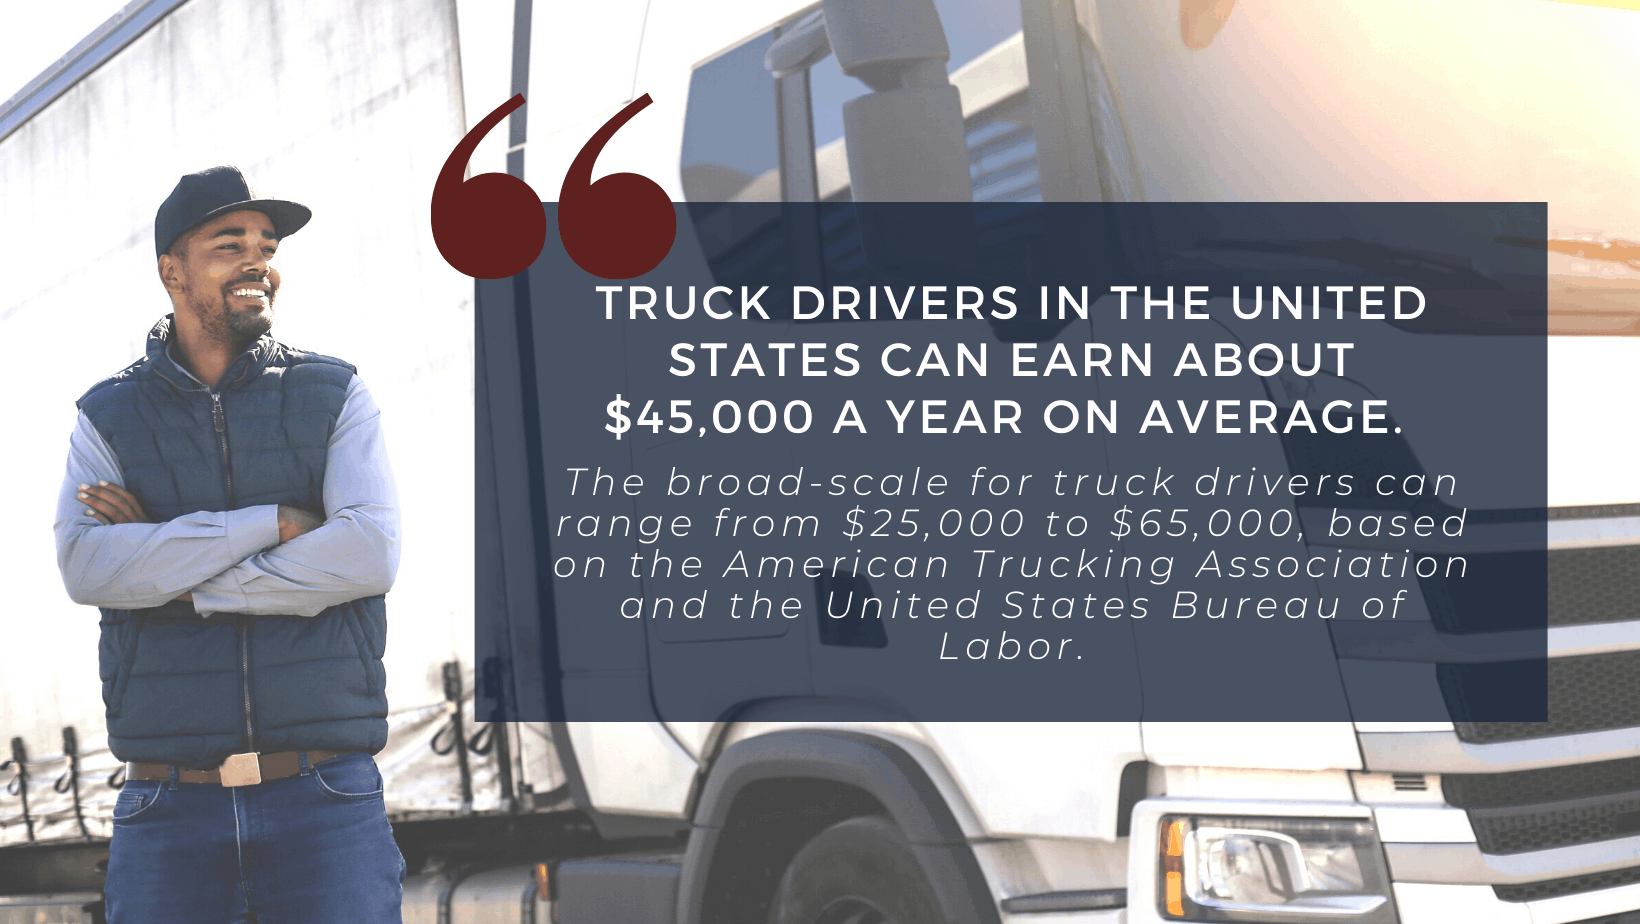 Requirements for Truck Drivers